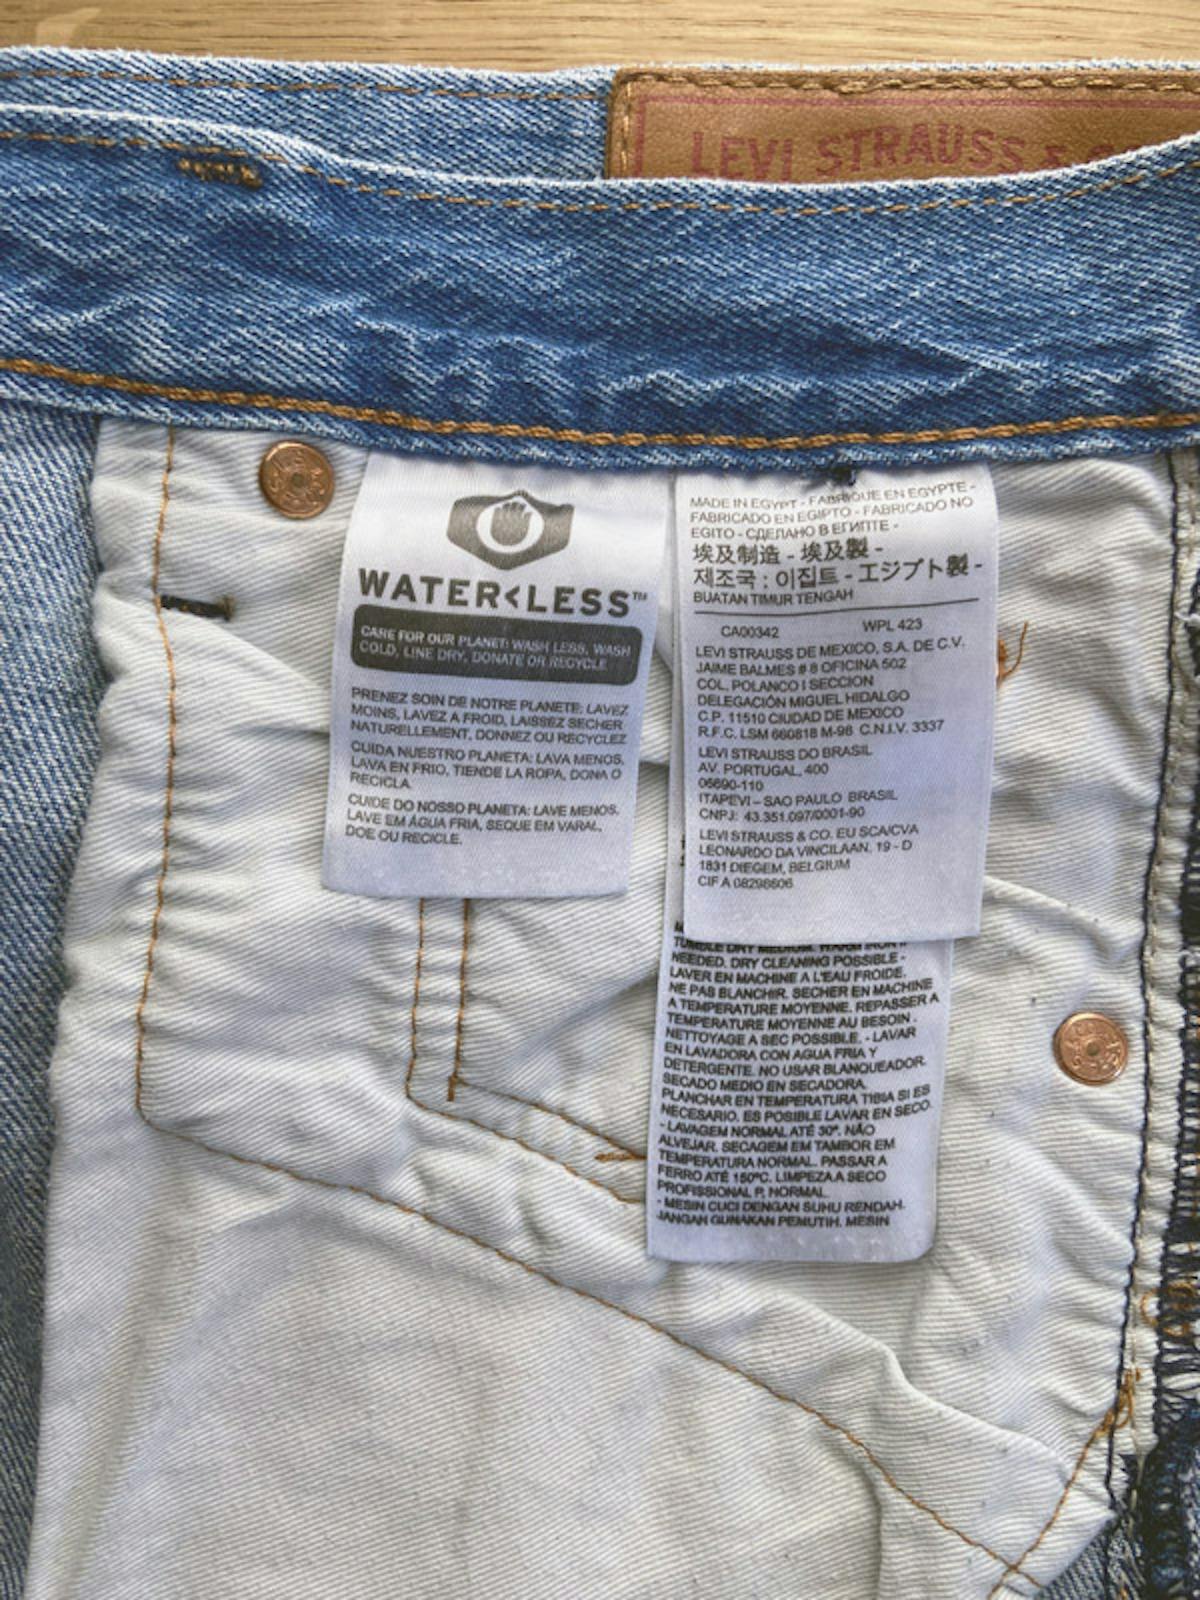 Levi Strauss tests 100% recycled water in parts of its jeans